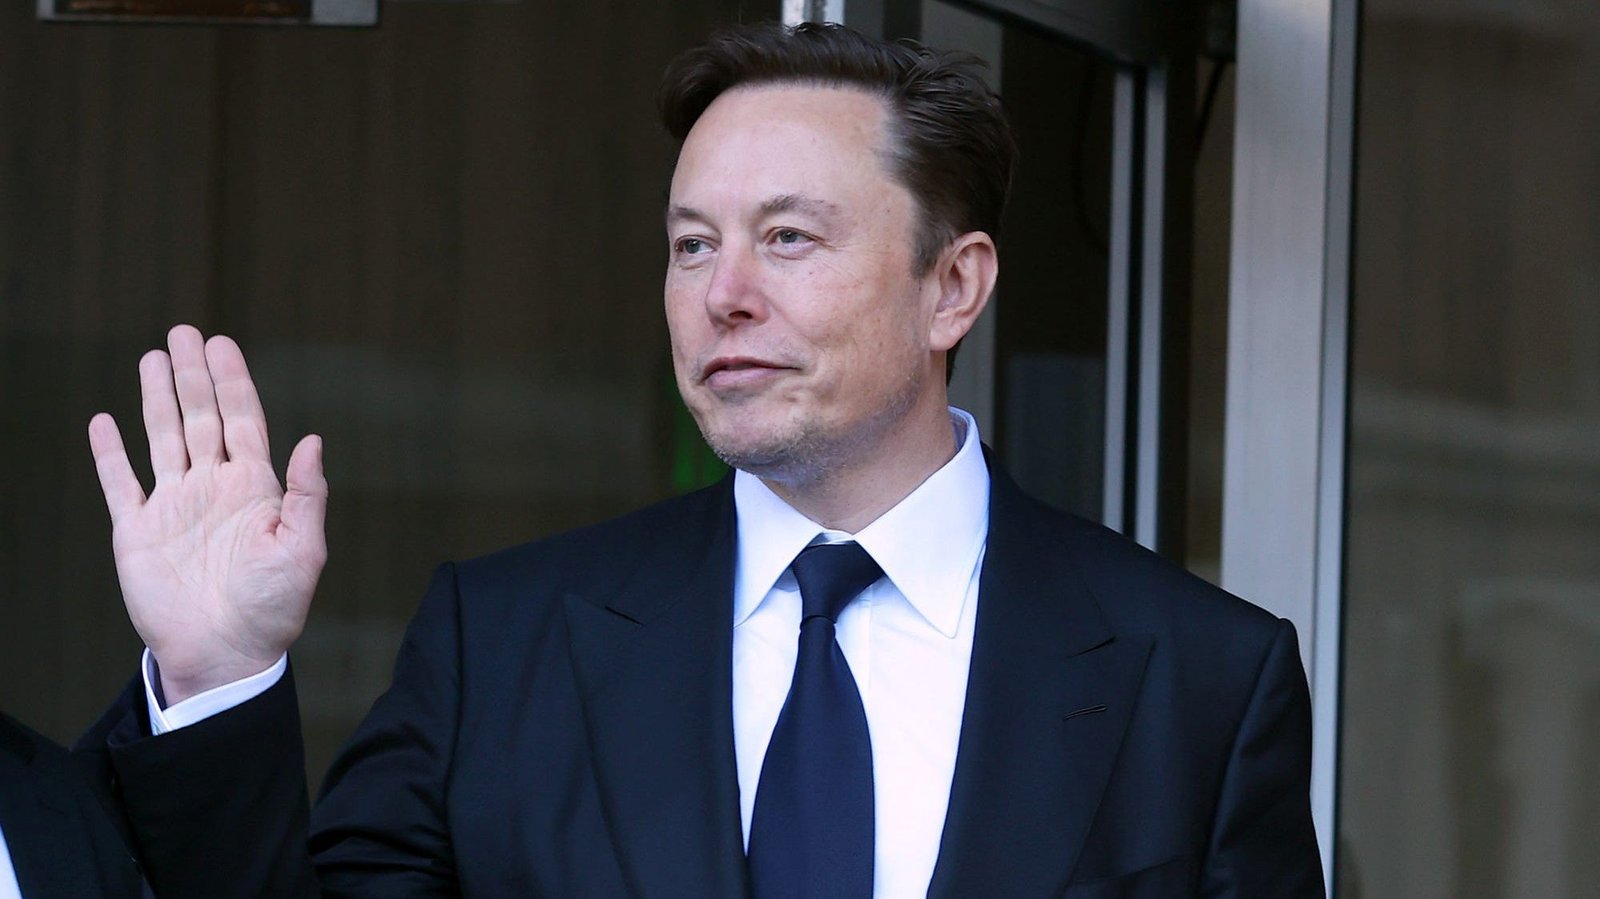 Elon Musk says Twitter will take legal action against a 'disgruntled employee'